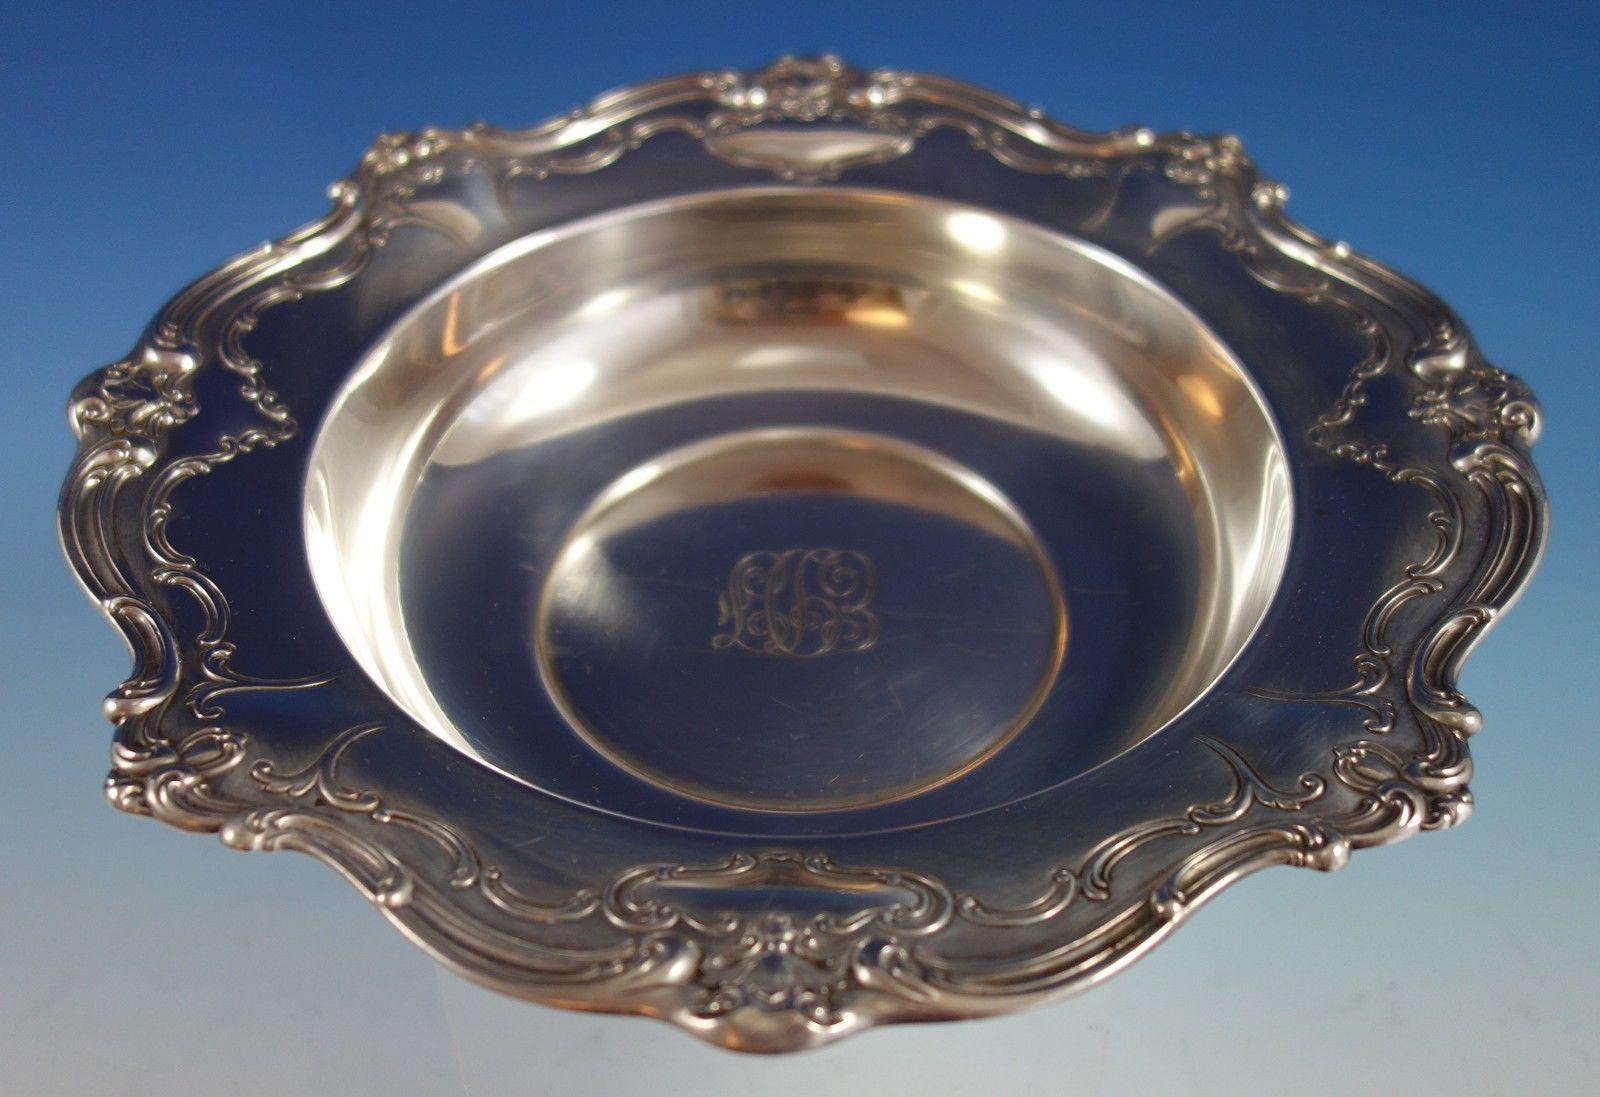 Stunning Chantilly by Gorham sterling silver fruit bowl marked #745. The piece measures 10 1/2 x 2 and weighs 15.5 troy ounces. It is monogrammed EDF (see photos), and is in excellent condition. Beautiful!



   